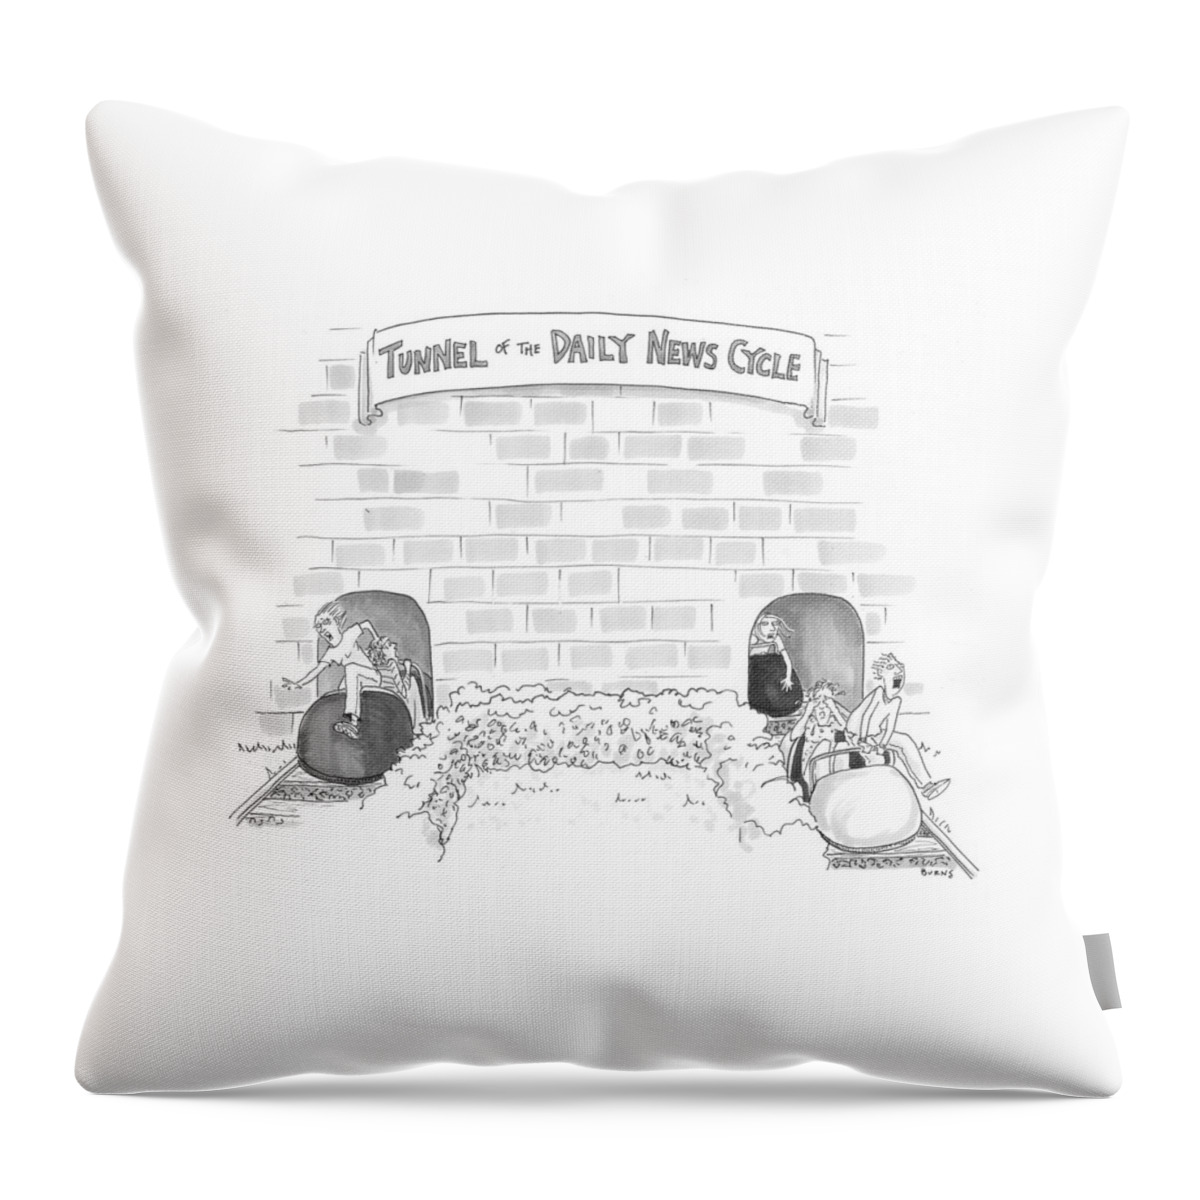 Daily News Cycle Throw Pillow